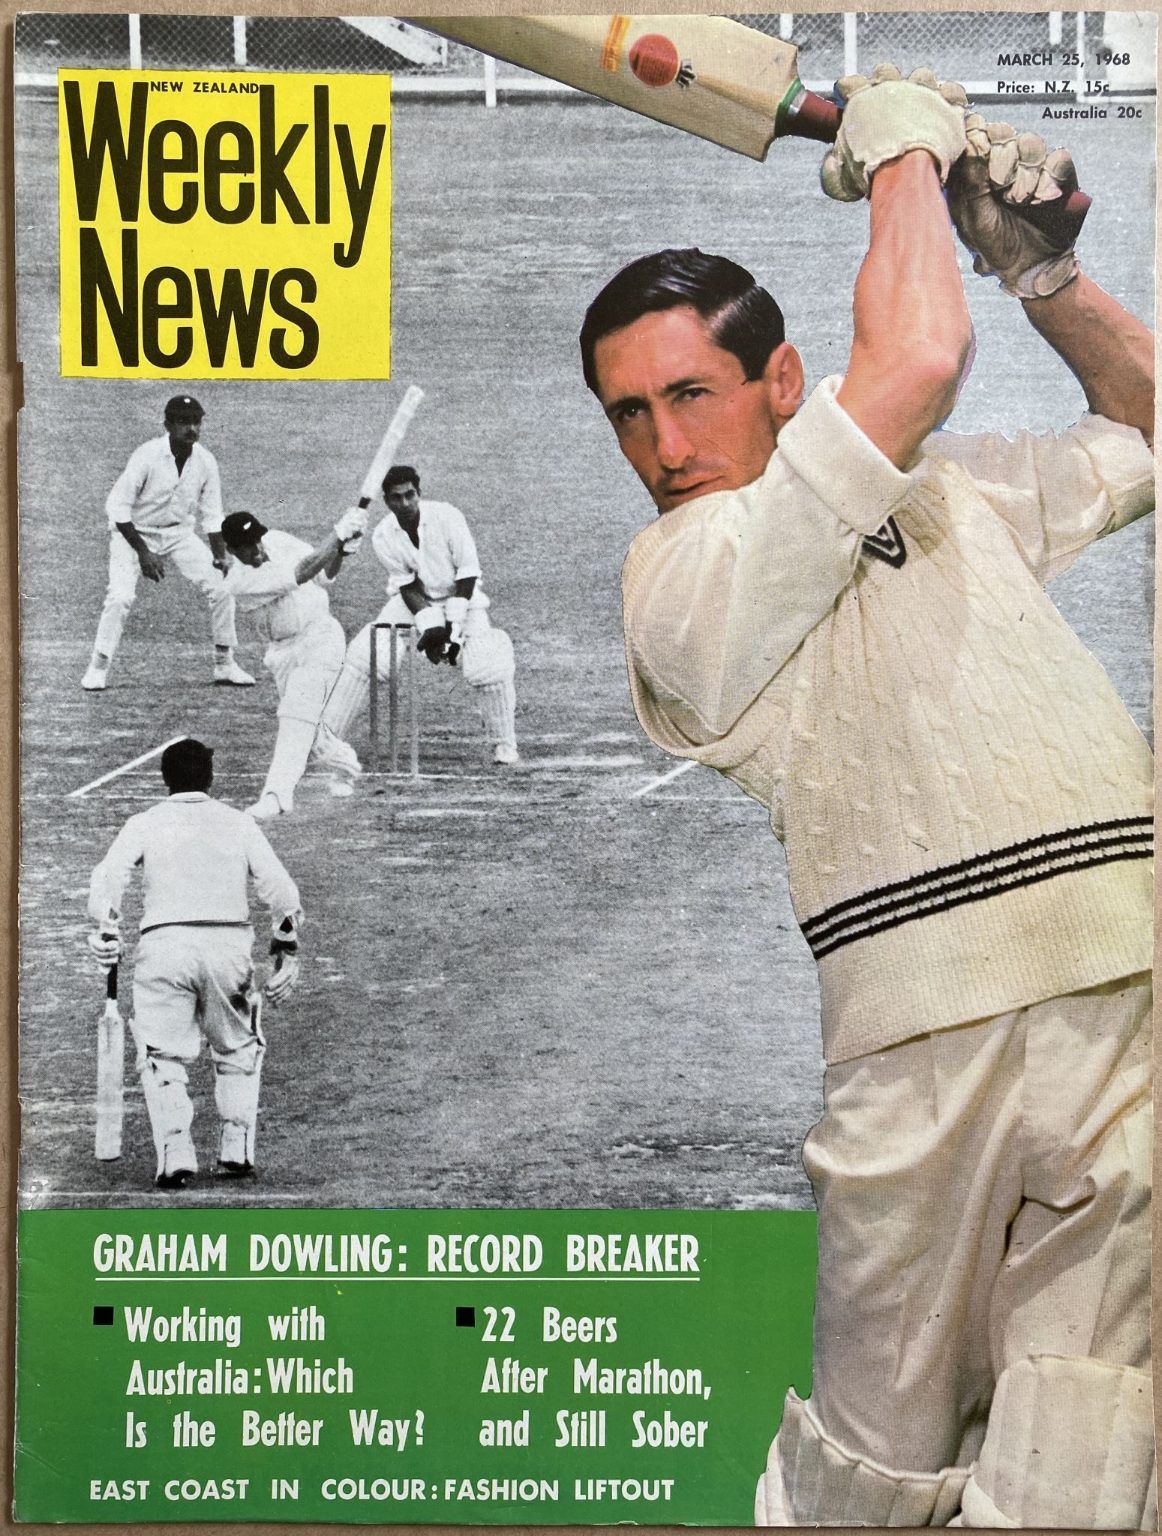 OLD NEWSPAPER: New Zealand Weekly News, No. 5443, 25 March 1968